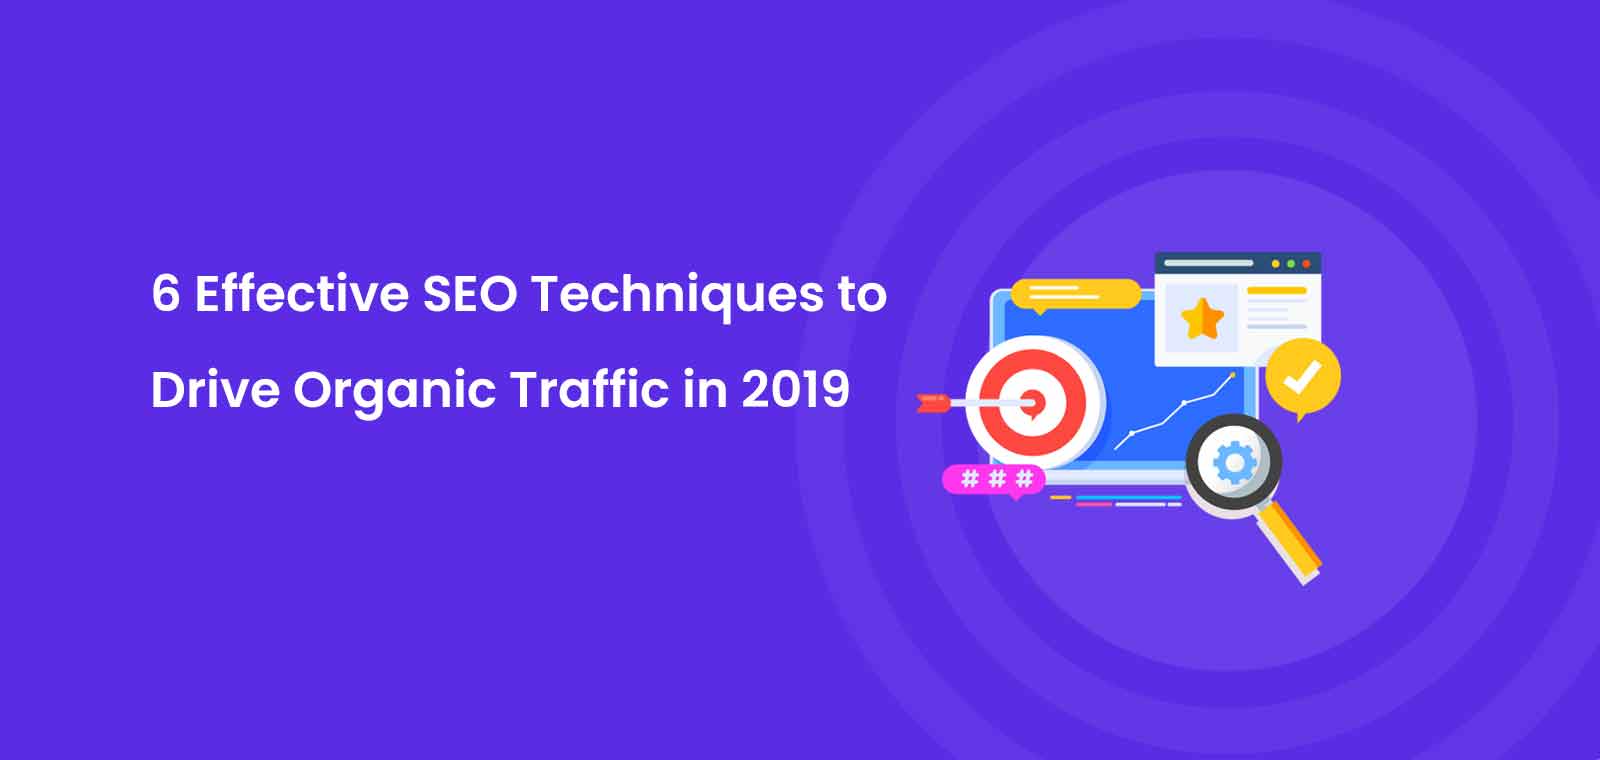 6 Effective SEO Techniques to Drive Organic Traffic in 2019